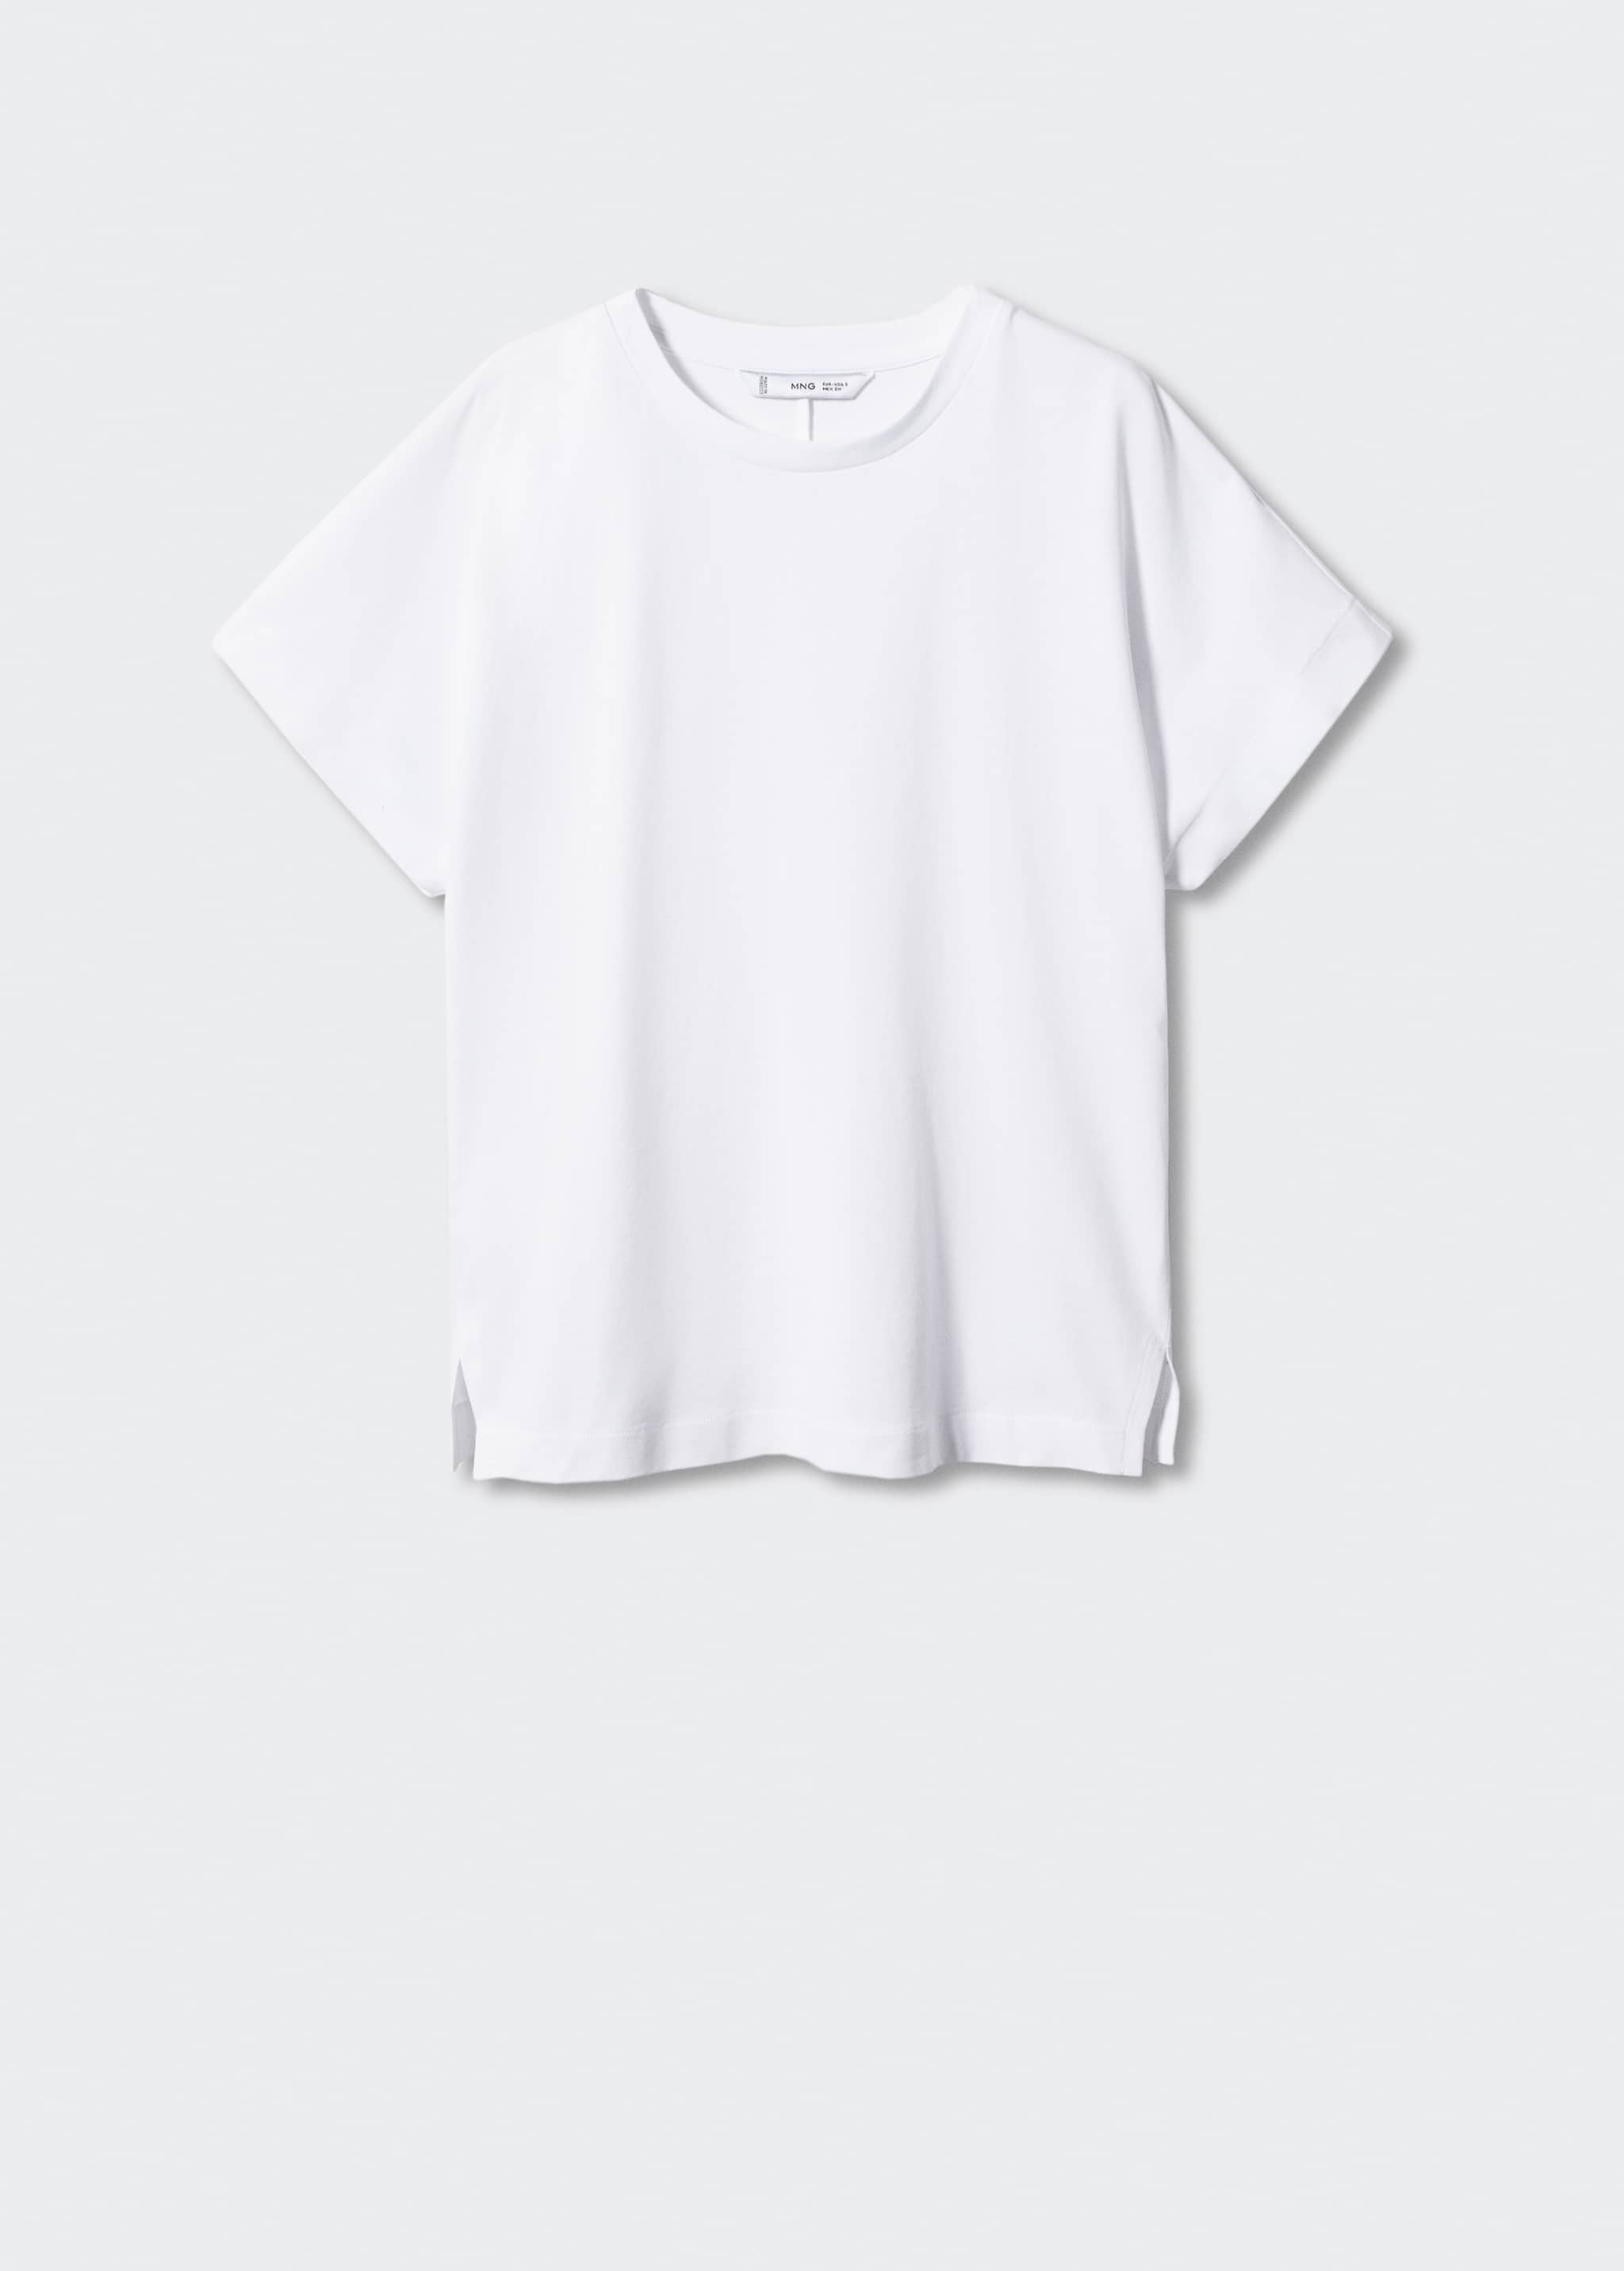 Short-sleeved cotton t-shirt - Article without model